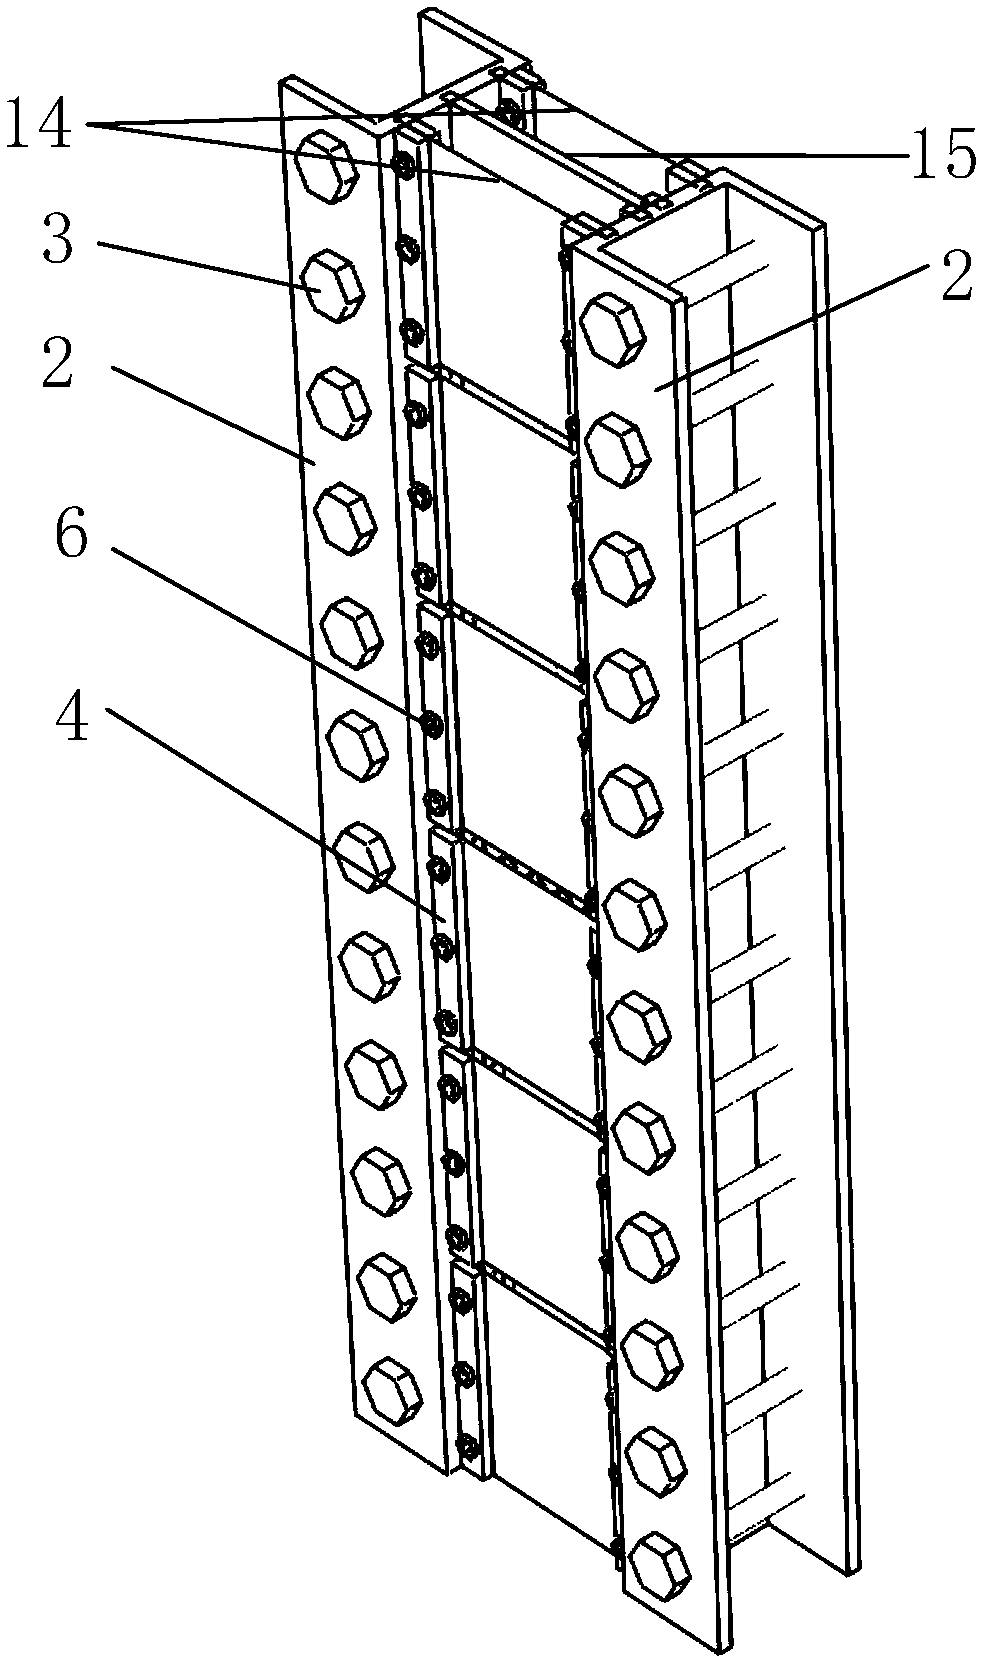 Fabricated stiffness-varied transverse connection energy dissipation piece and installation method